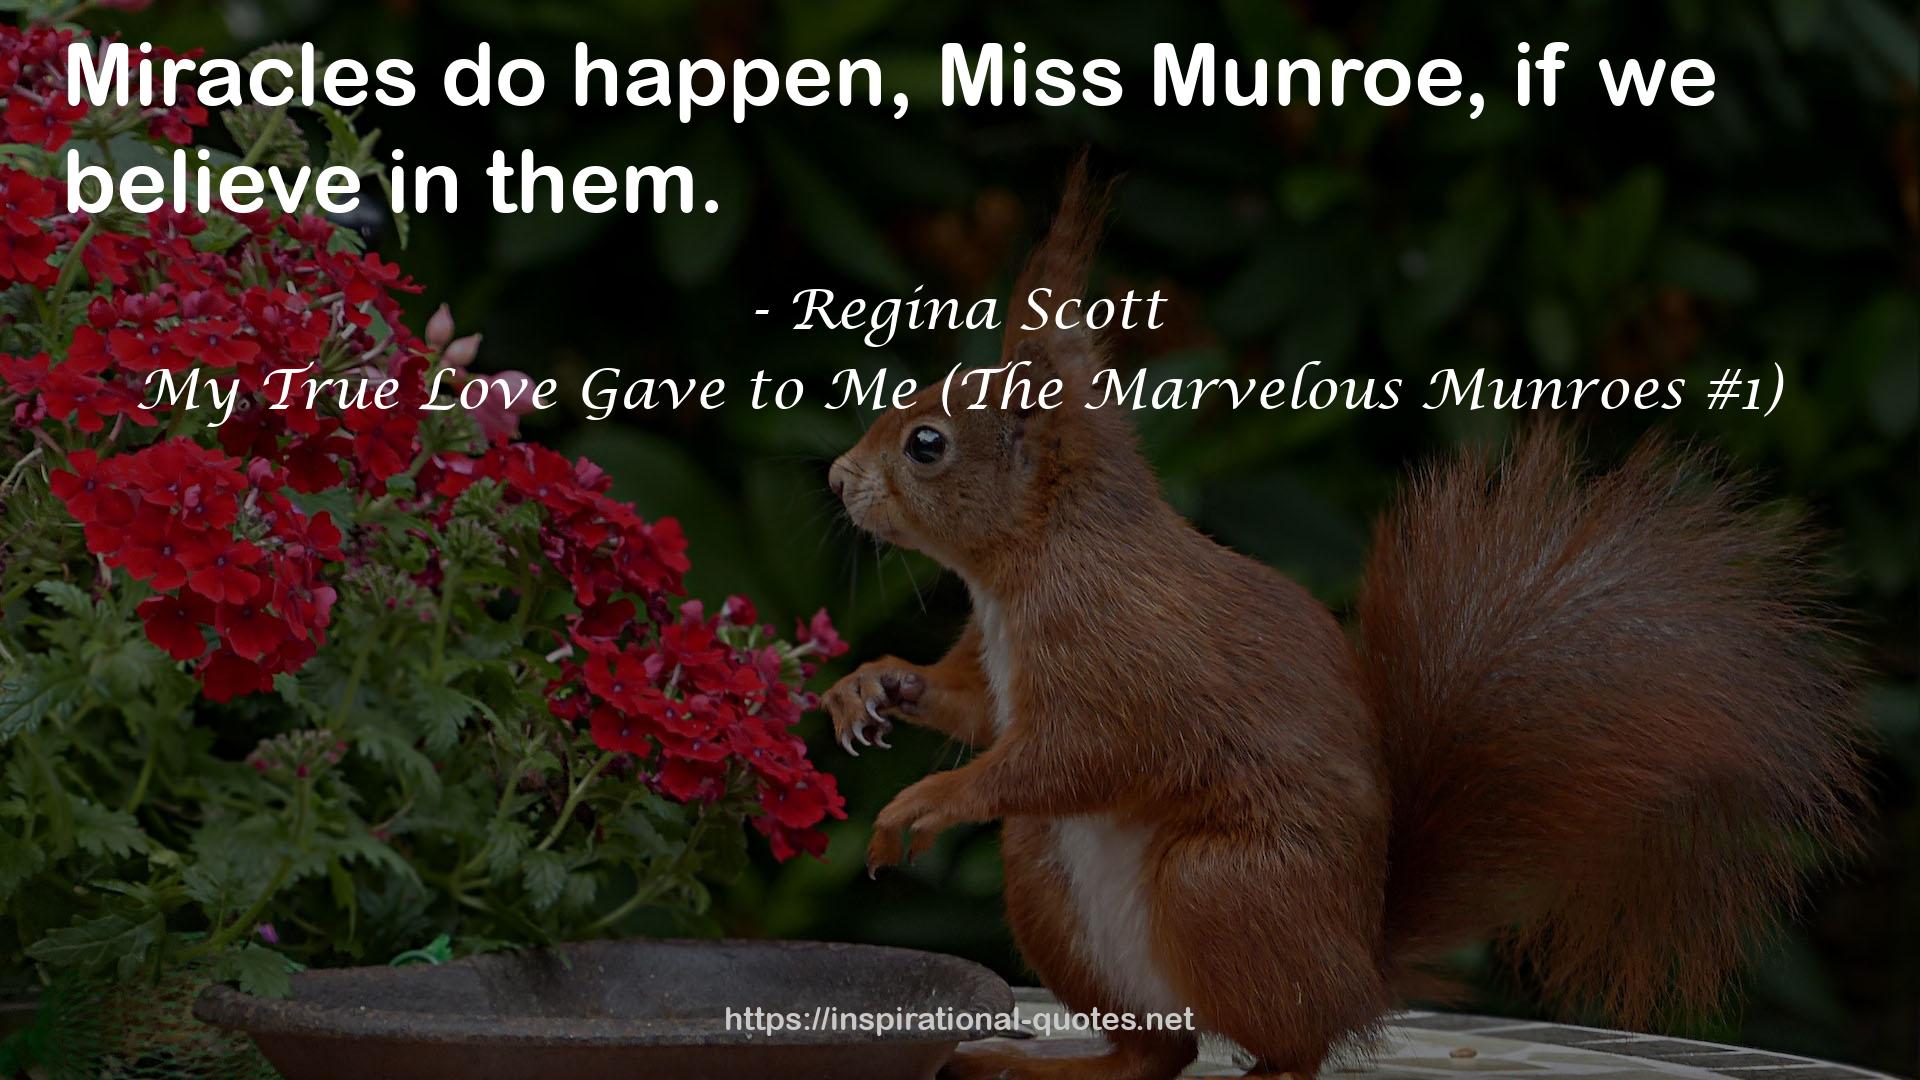 My True Love Gave to Me (The Marvelous Munroes #1) QUOTES